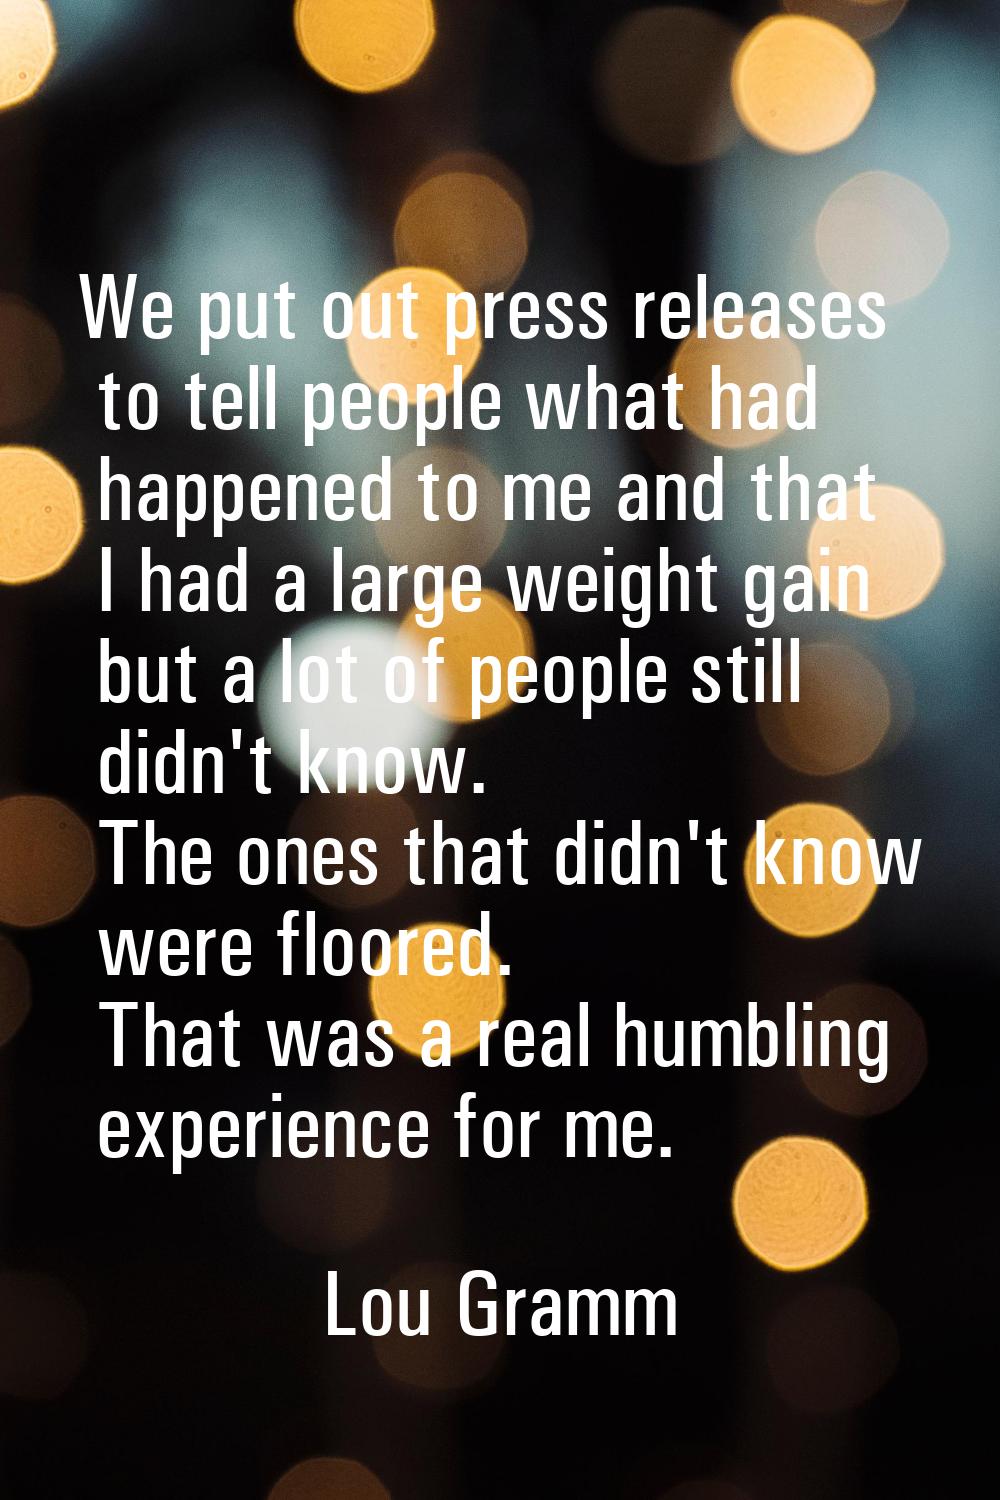 We put out press releases to tell people what had happened to me and that I had a large weight gain